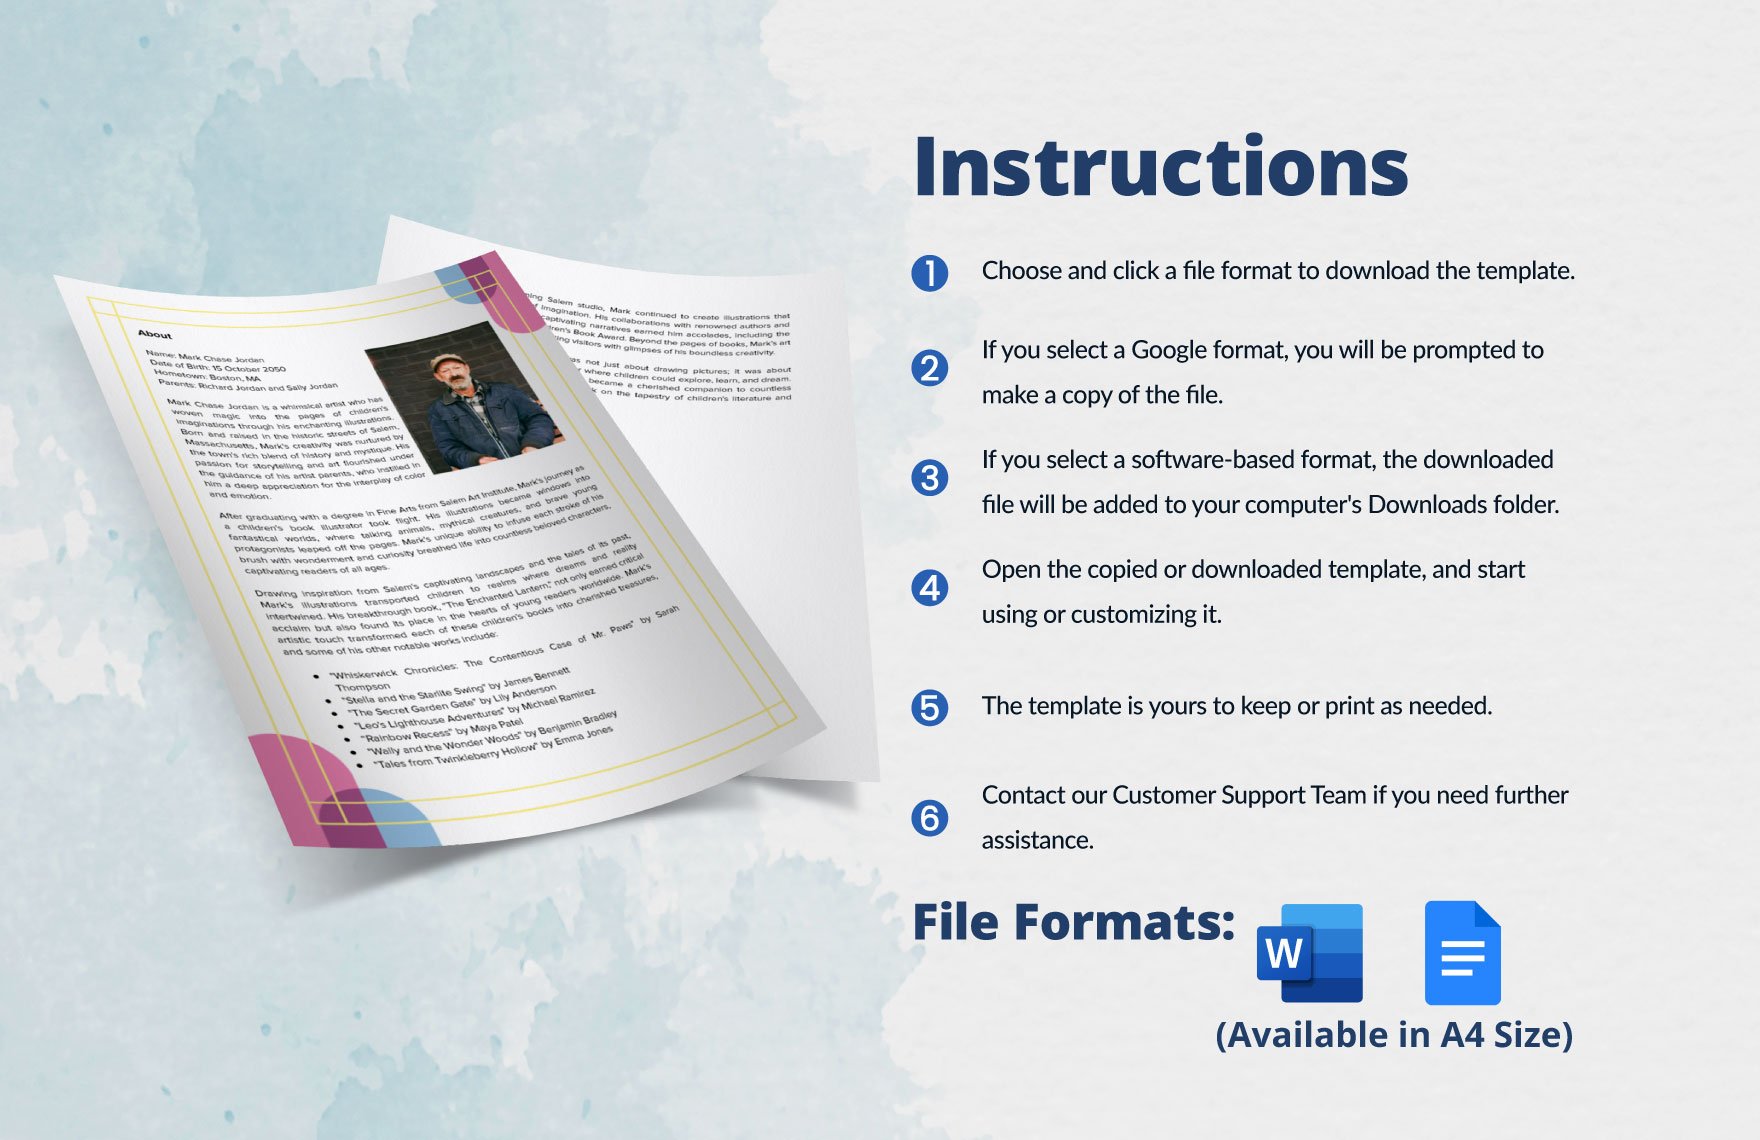 Brief Biography Template